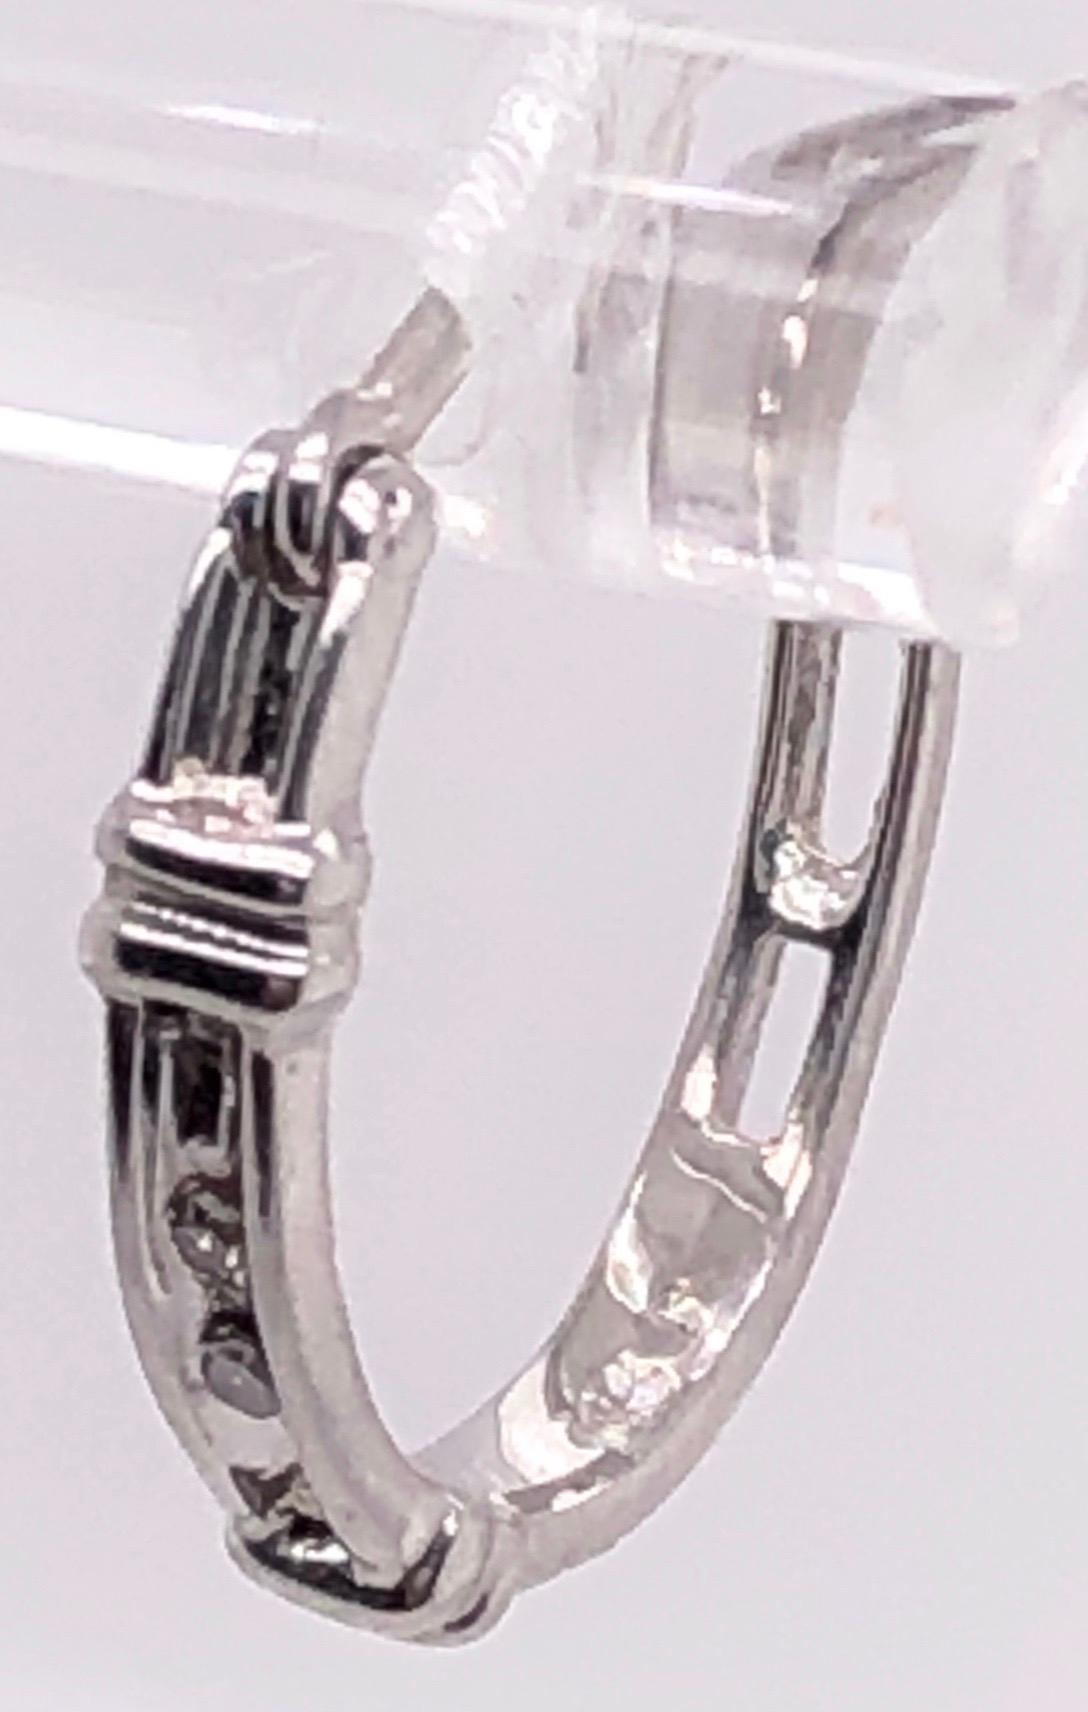 14 Karat White Gold Freestyle Earrings with Diamonds.
0.04 total diamond weight.
1.65 grams total weight.